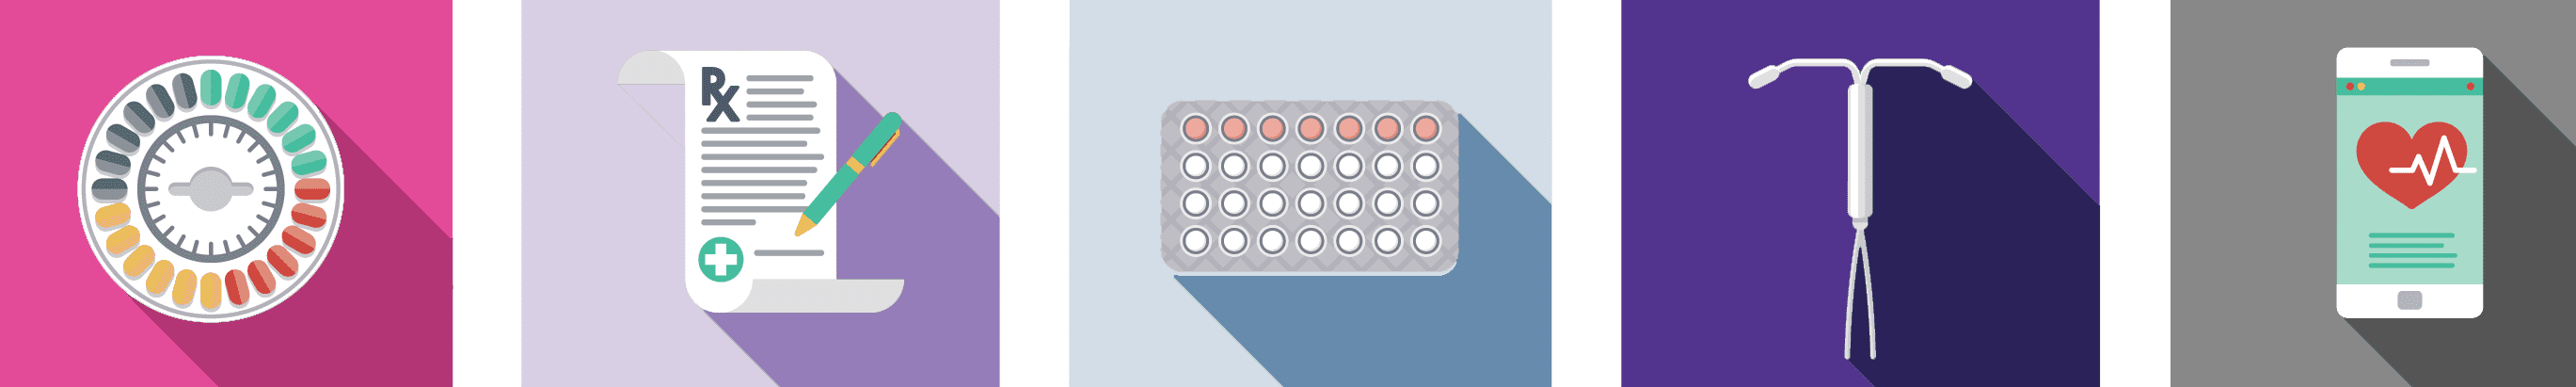 Illustrated icons picture birth control pills, a presciption, birth control pills in a different packaging, an IUD and a health app on a cell phone.